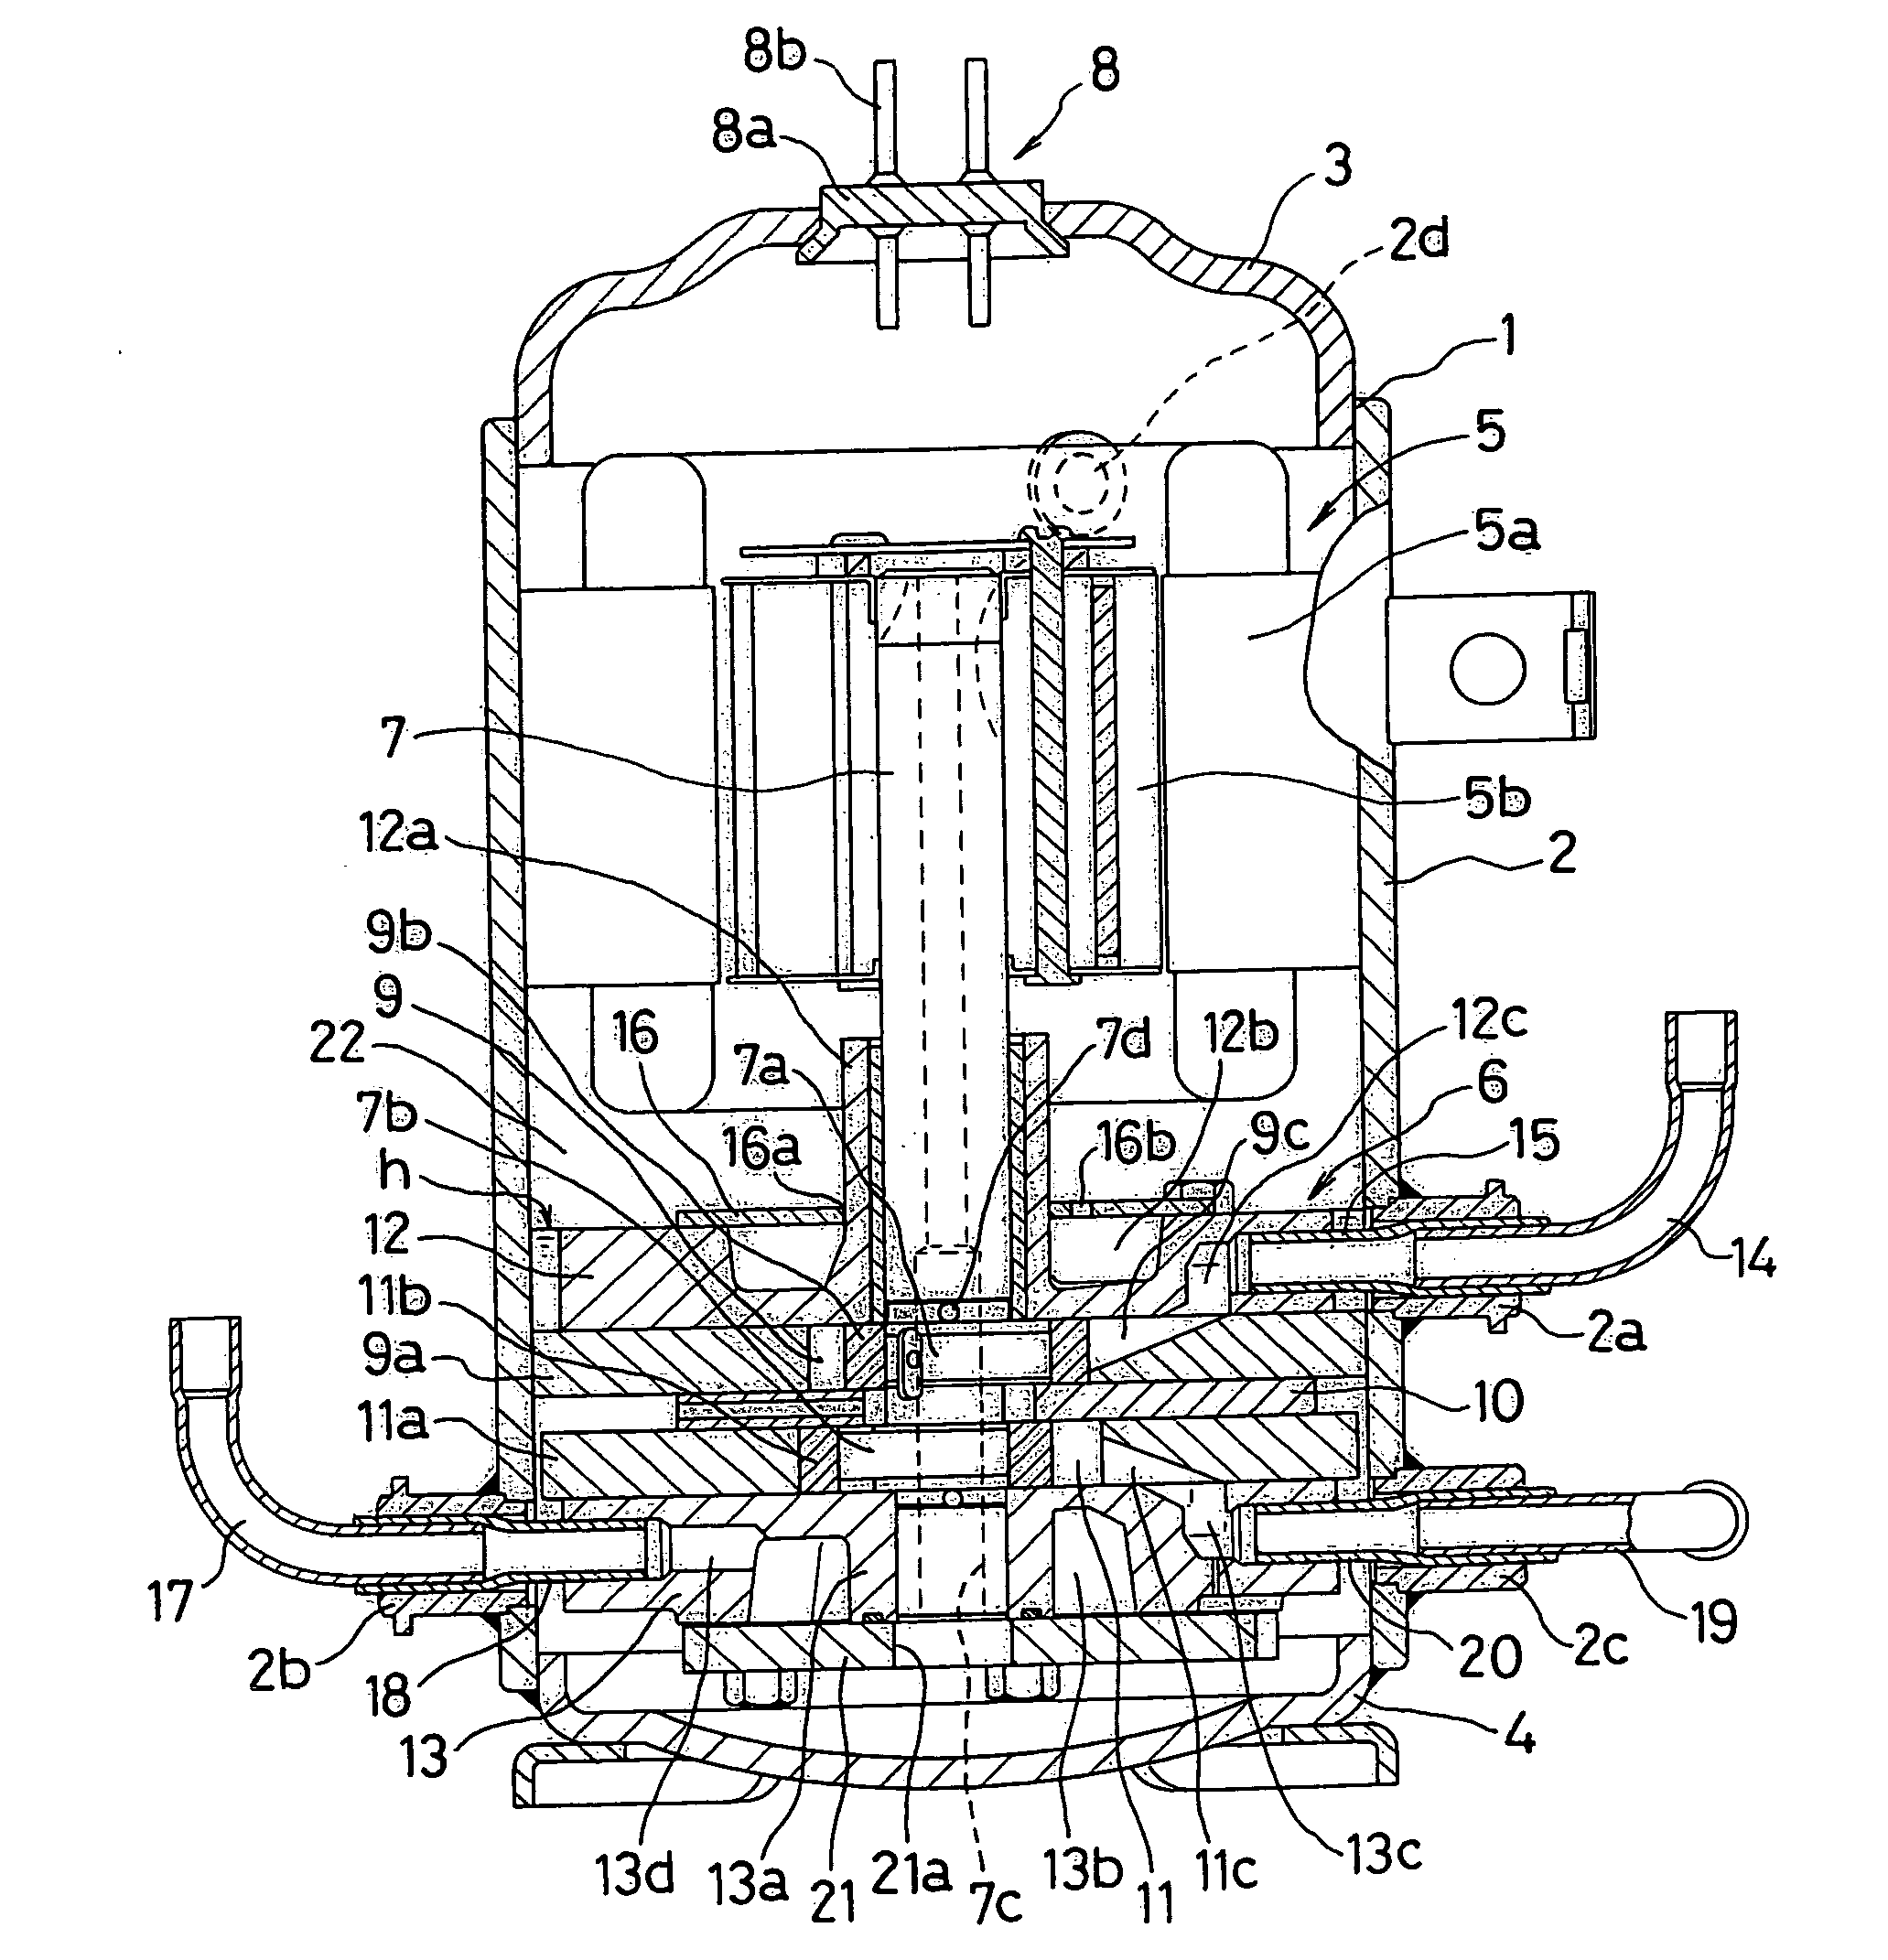 Multistage rotary compressor